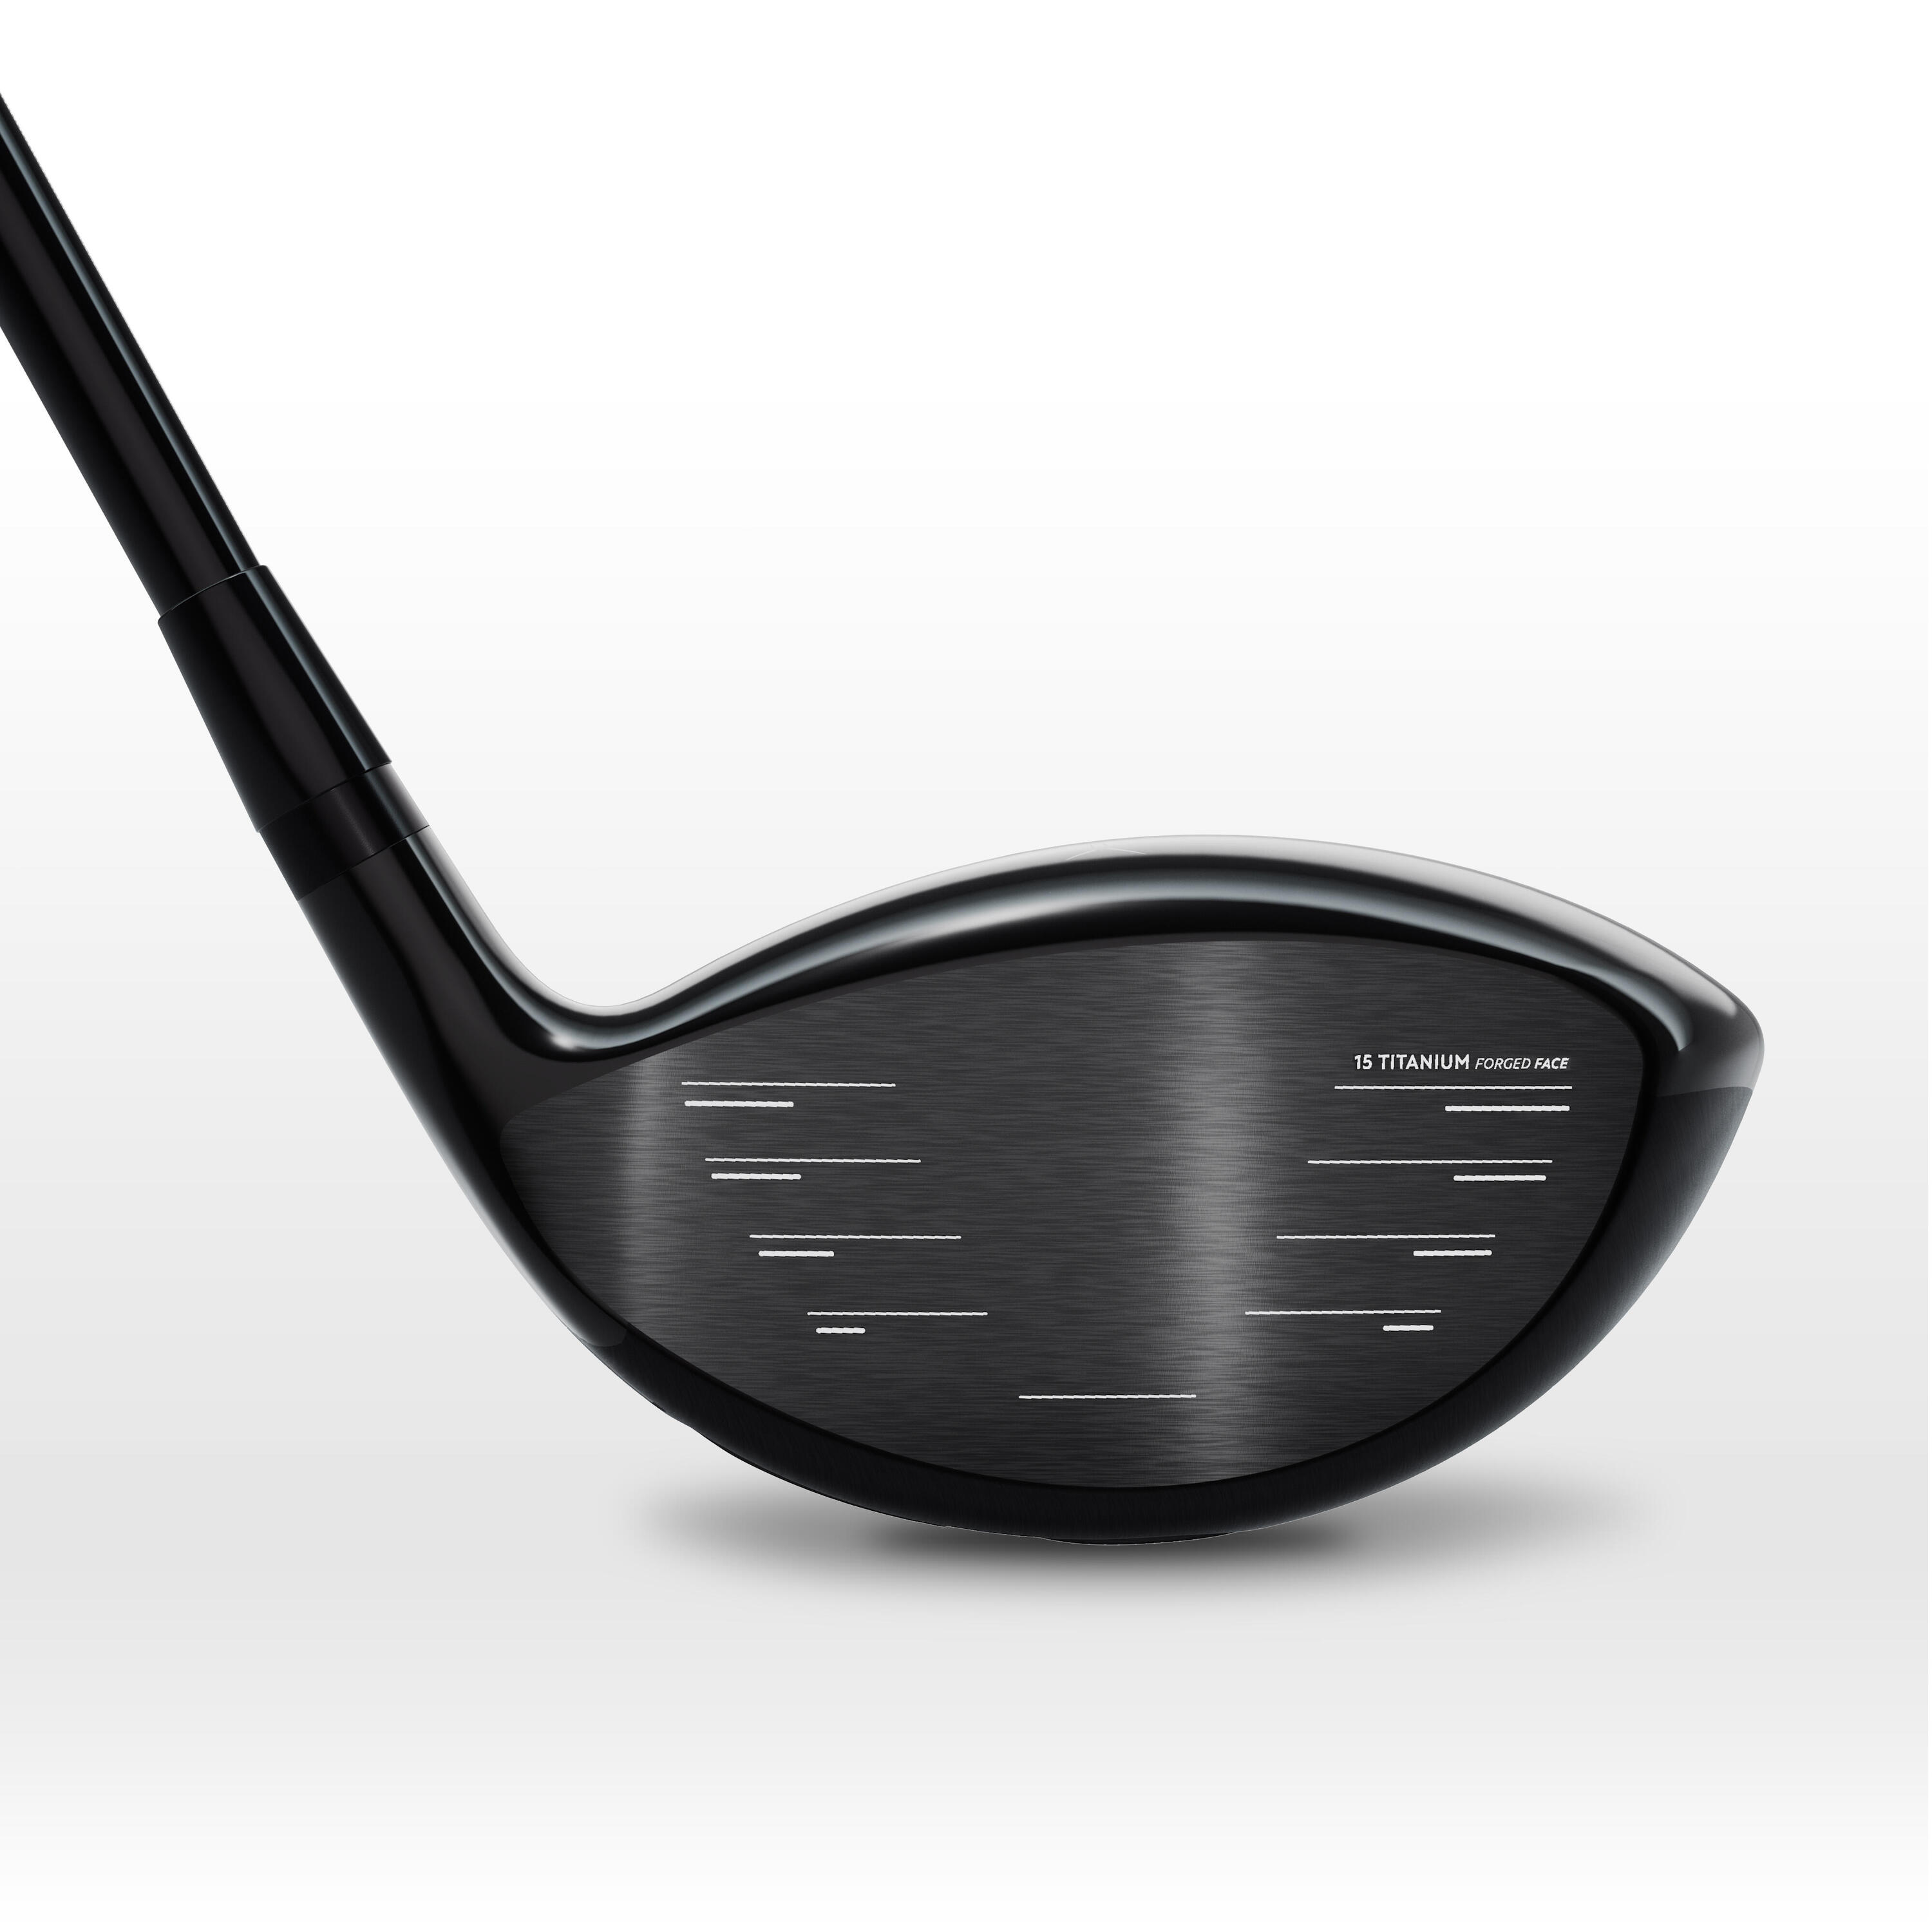 Golf driver left handed high speed - INESIS 900 4/8